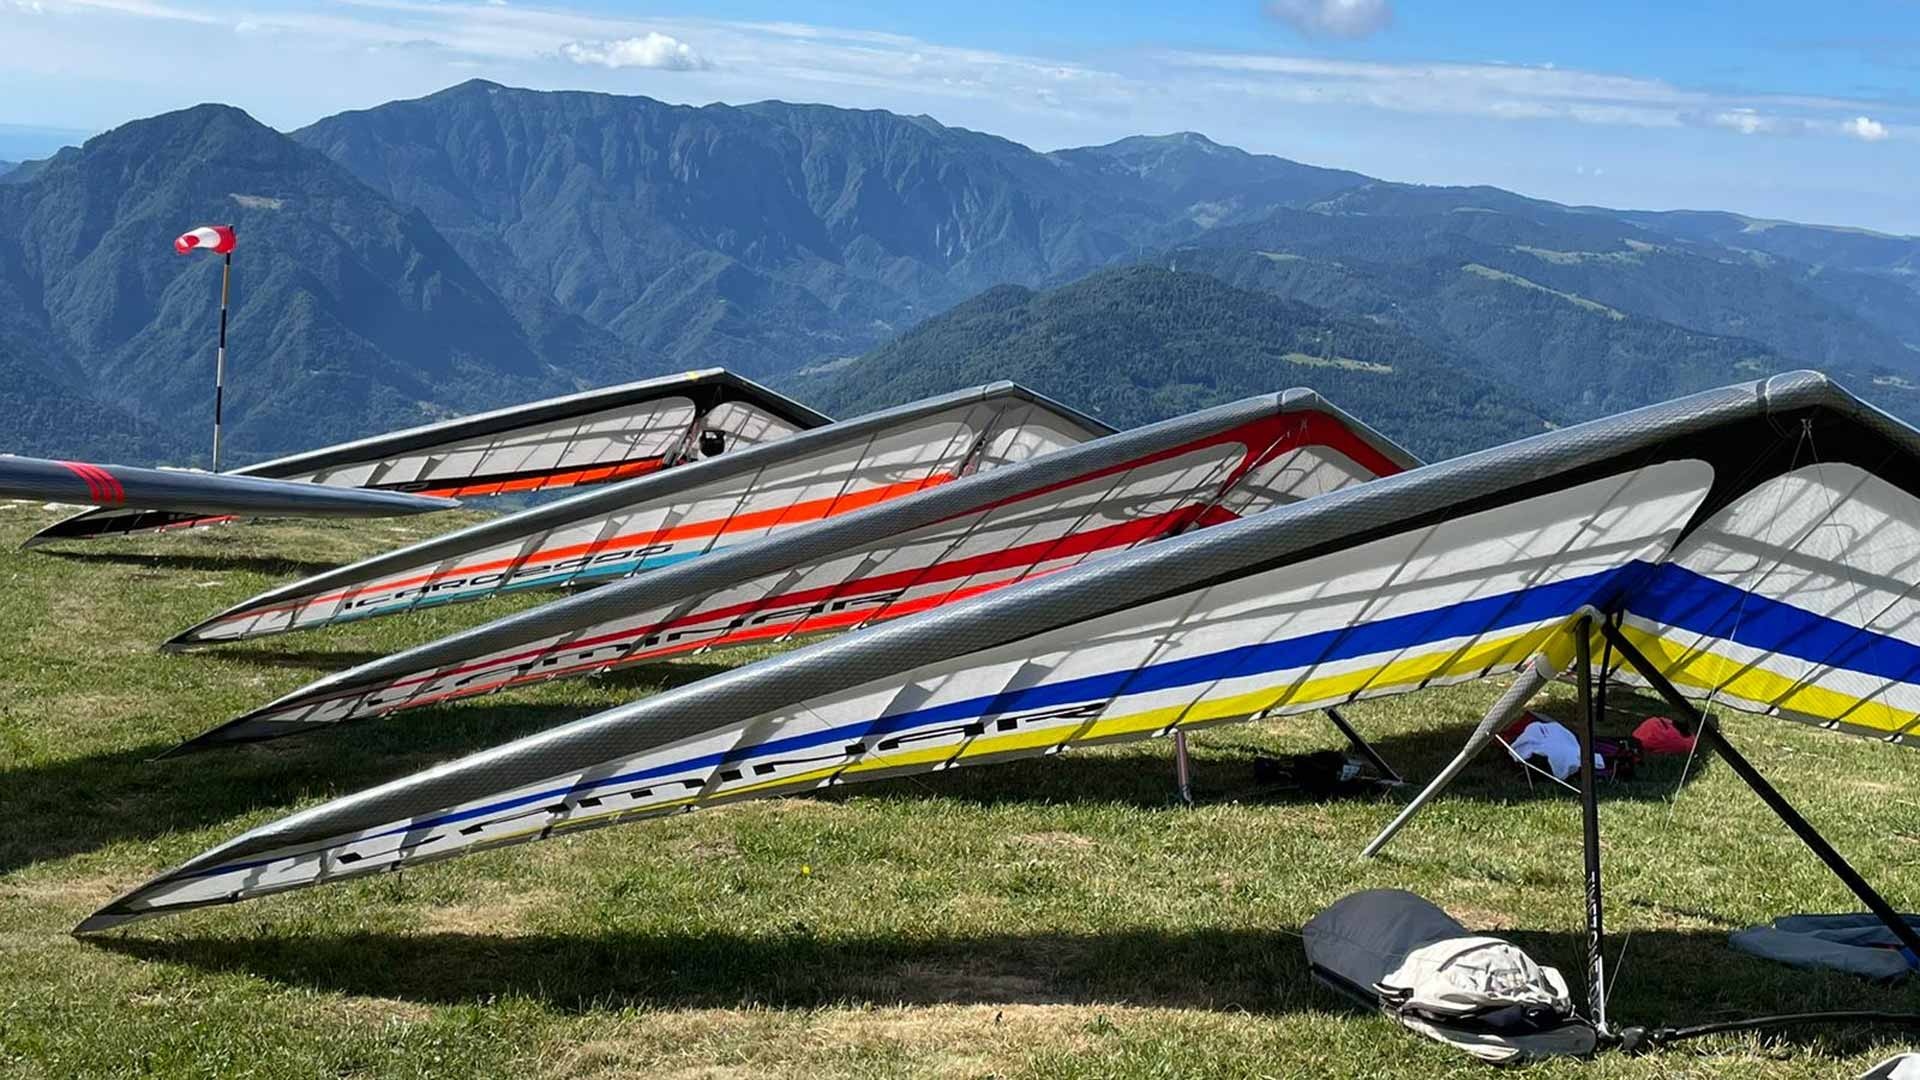 Gliding: Icaro Laminar gliders, Italian high-wing sailplanes, Single-place and two-place hang gliders. 1920x1080 Full HD Background.